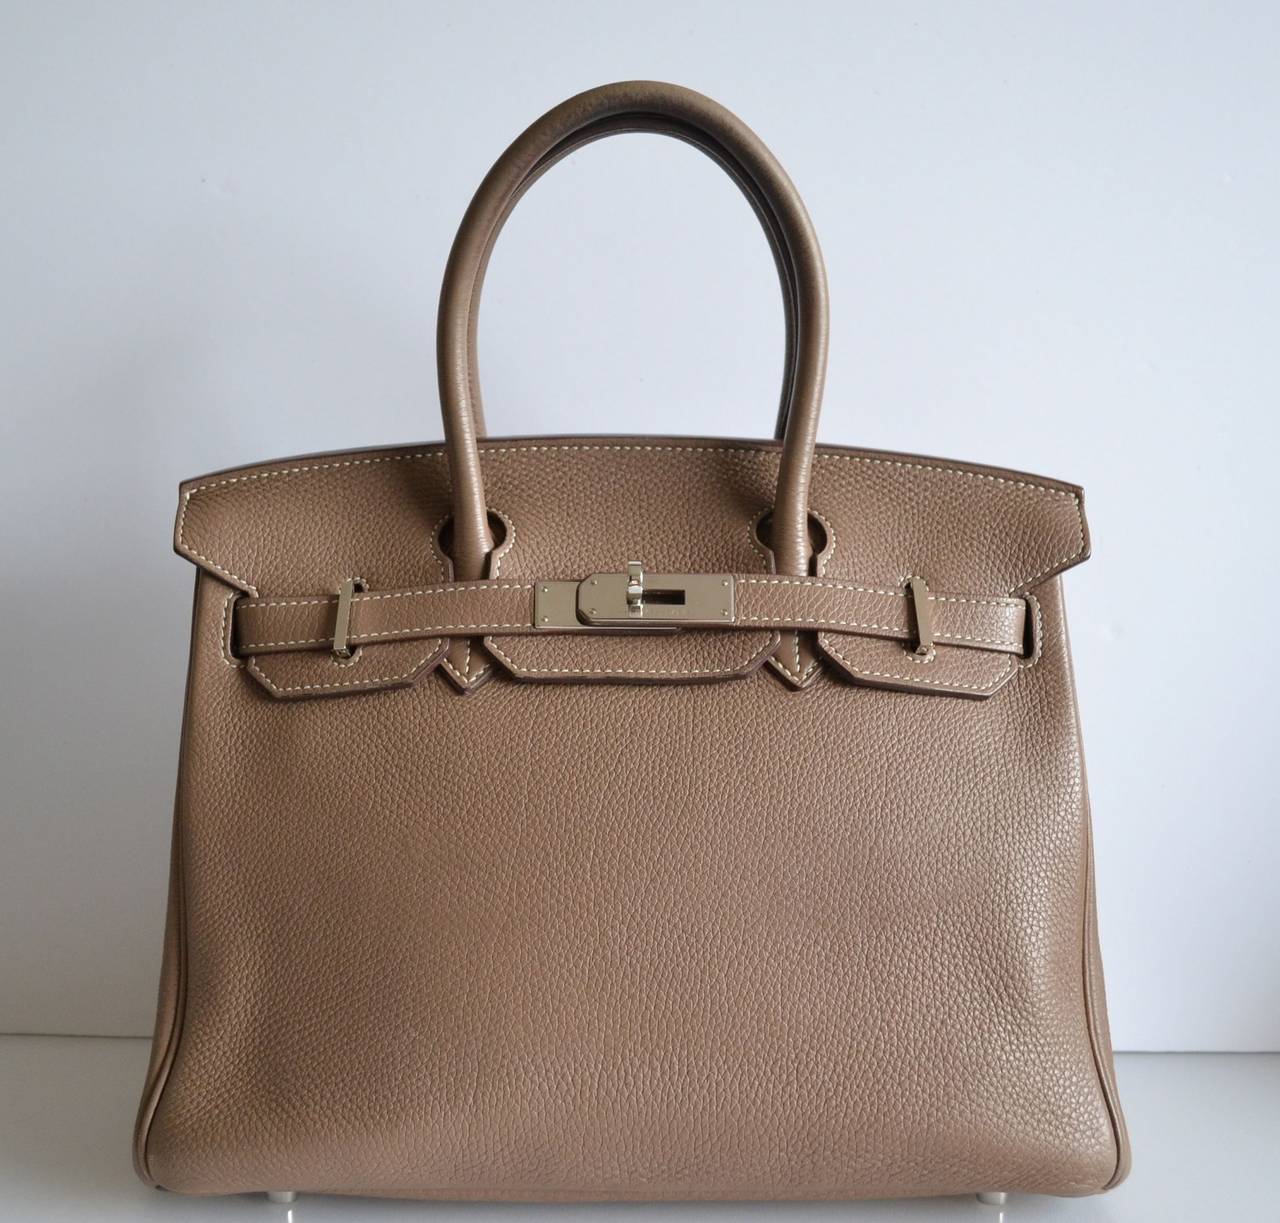 Hermes Birkin 30 Togo Etoupe
 
Togo leather with palladium hardware
 
Good condition
Stamp N
Hermes Paris Made In France
 
Togo leather is in very good condition - Interior is odorless - Corners are good - Hardware is in very good working –